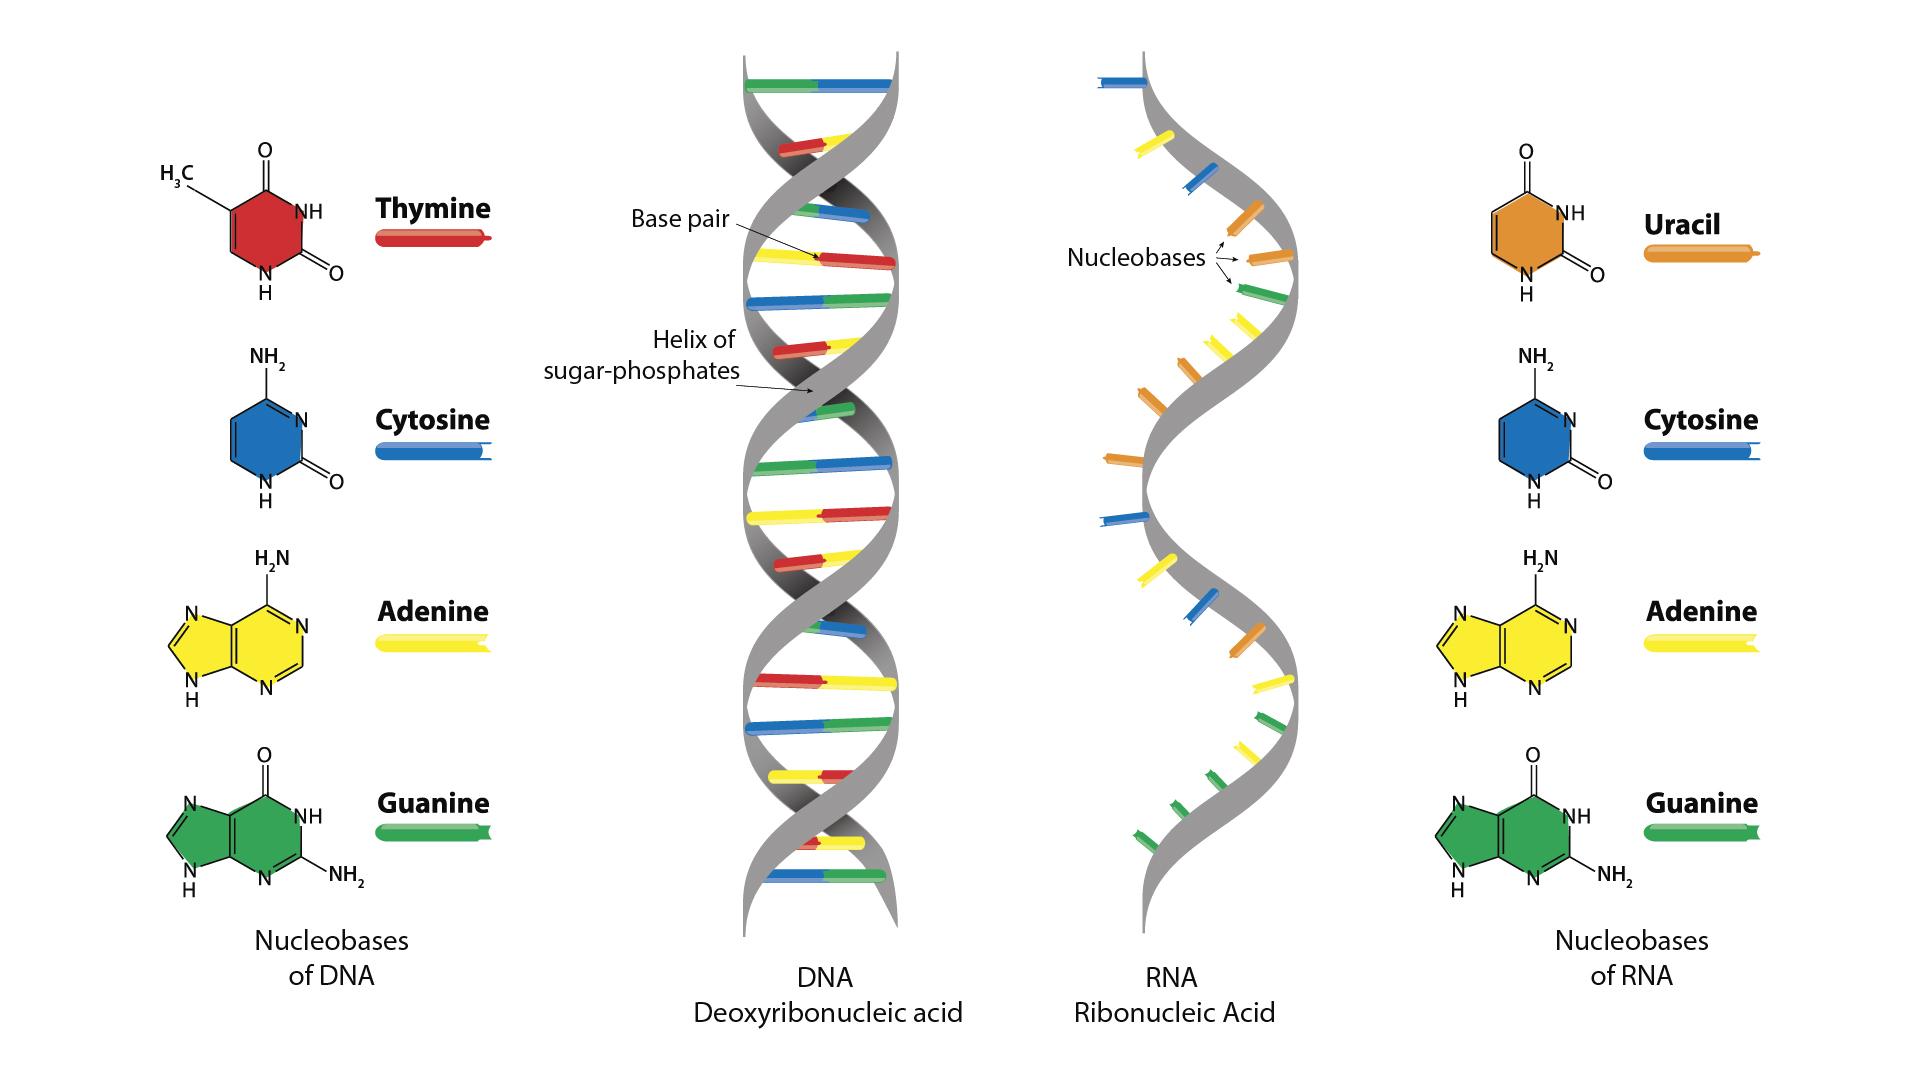 Molecules of DNA and RNA are compared and contrasted.